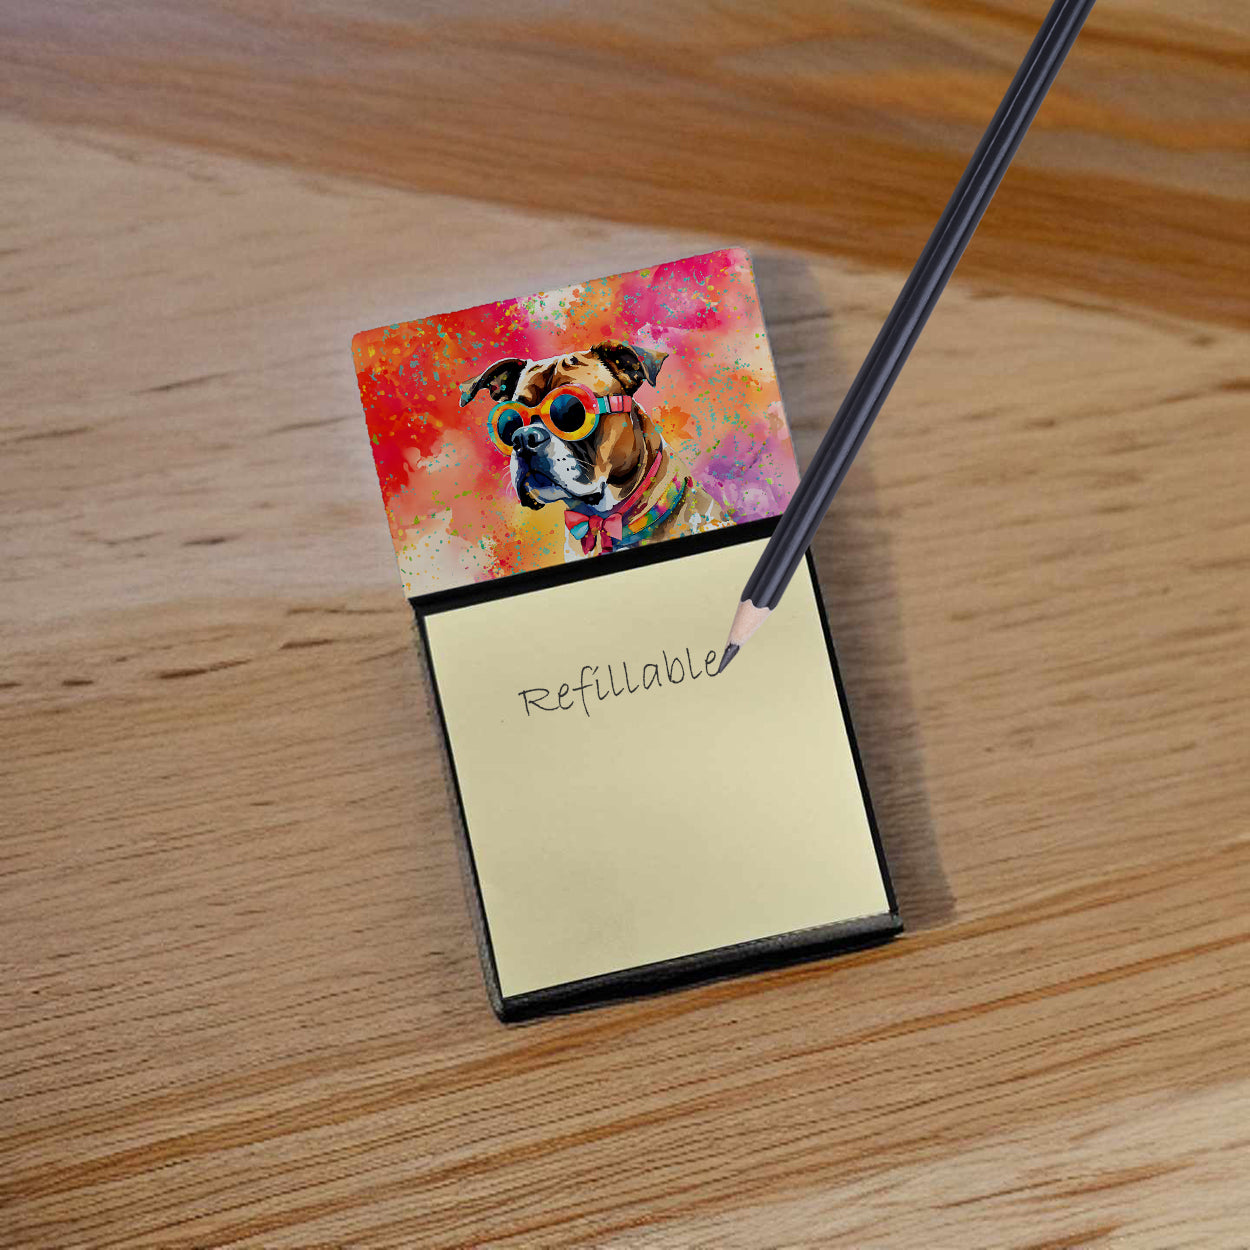 Buy this Boxer Hippie Dawg Sticky Note Holder